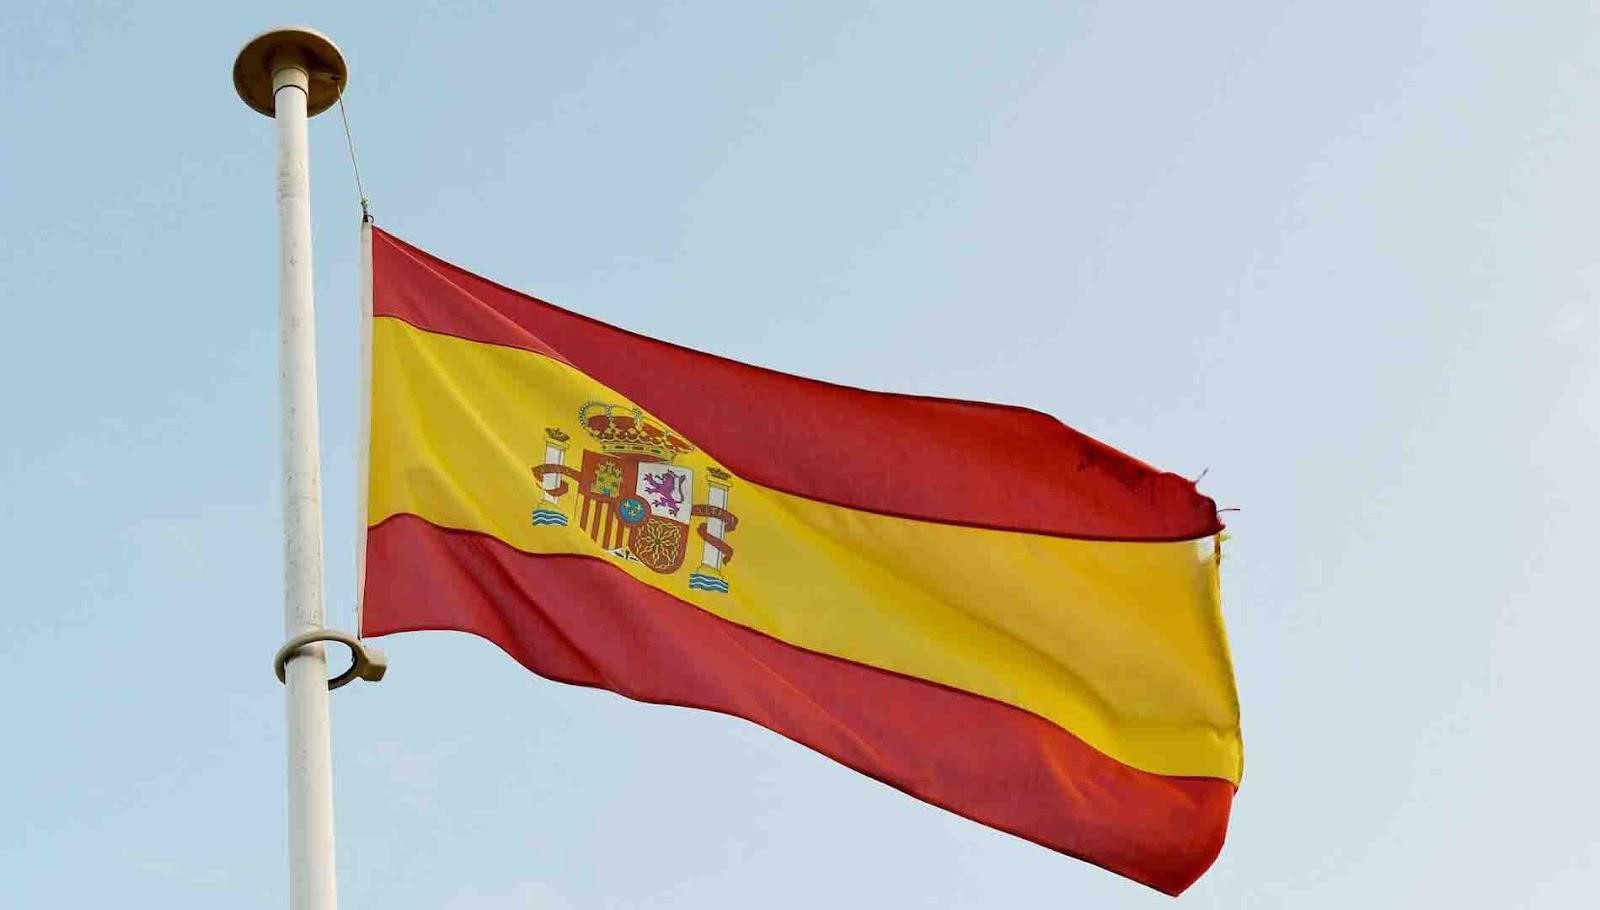 An image of the Spanish flag